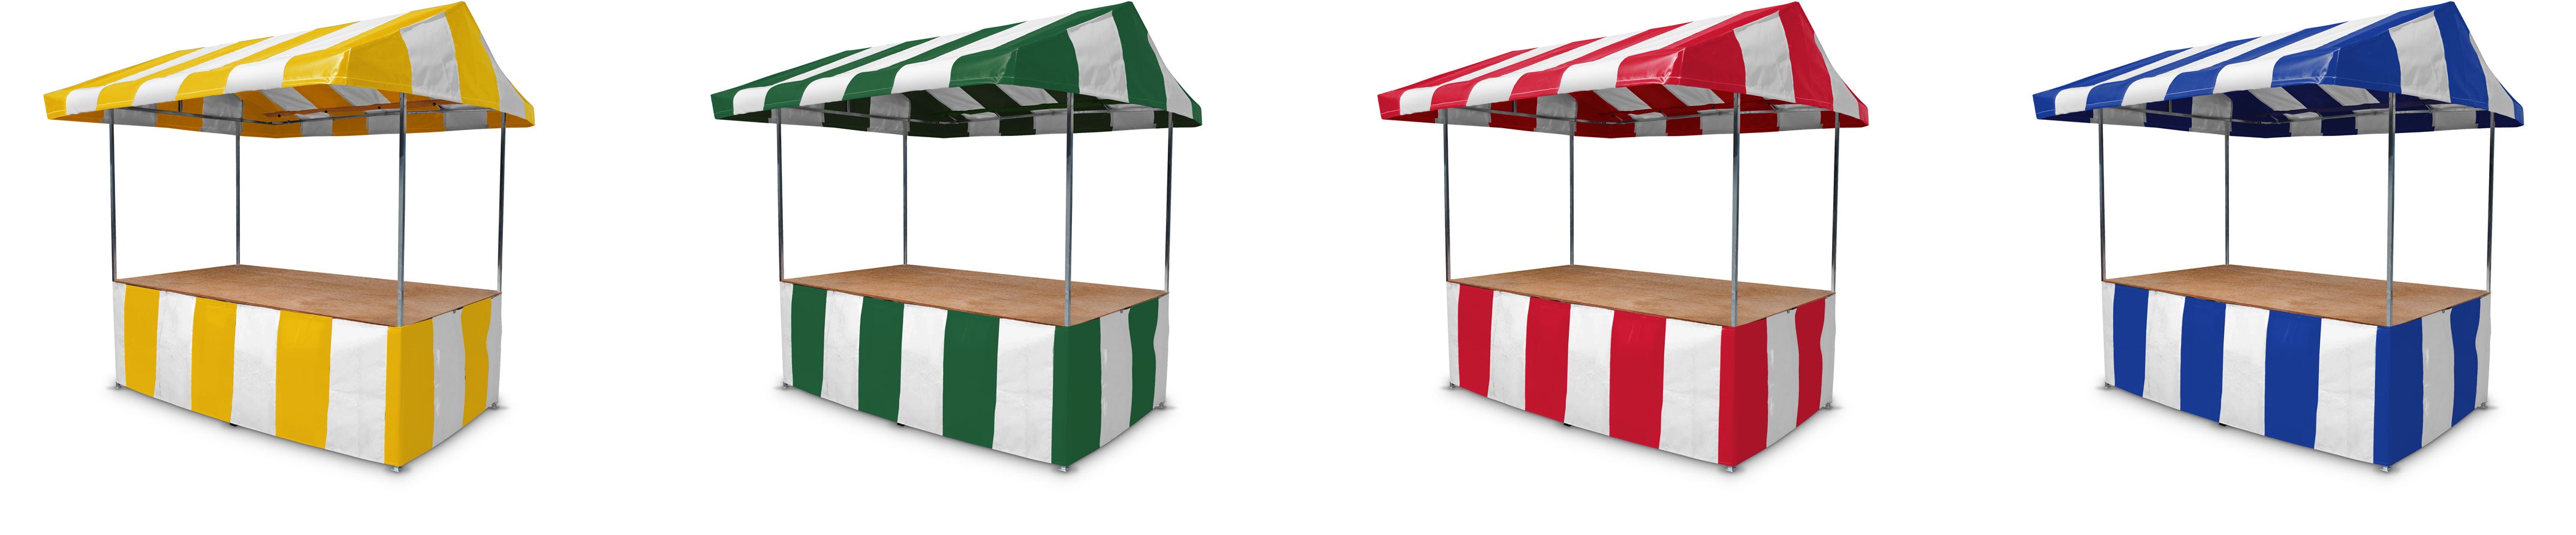 Market Stall Roof Canopy and Counter Wraps Colour Options